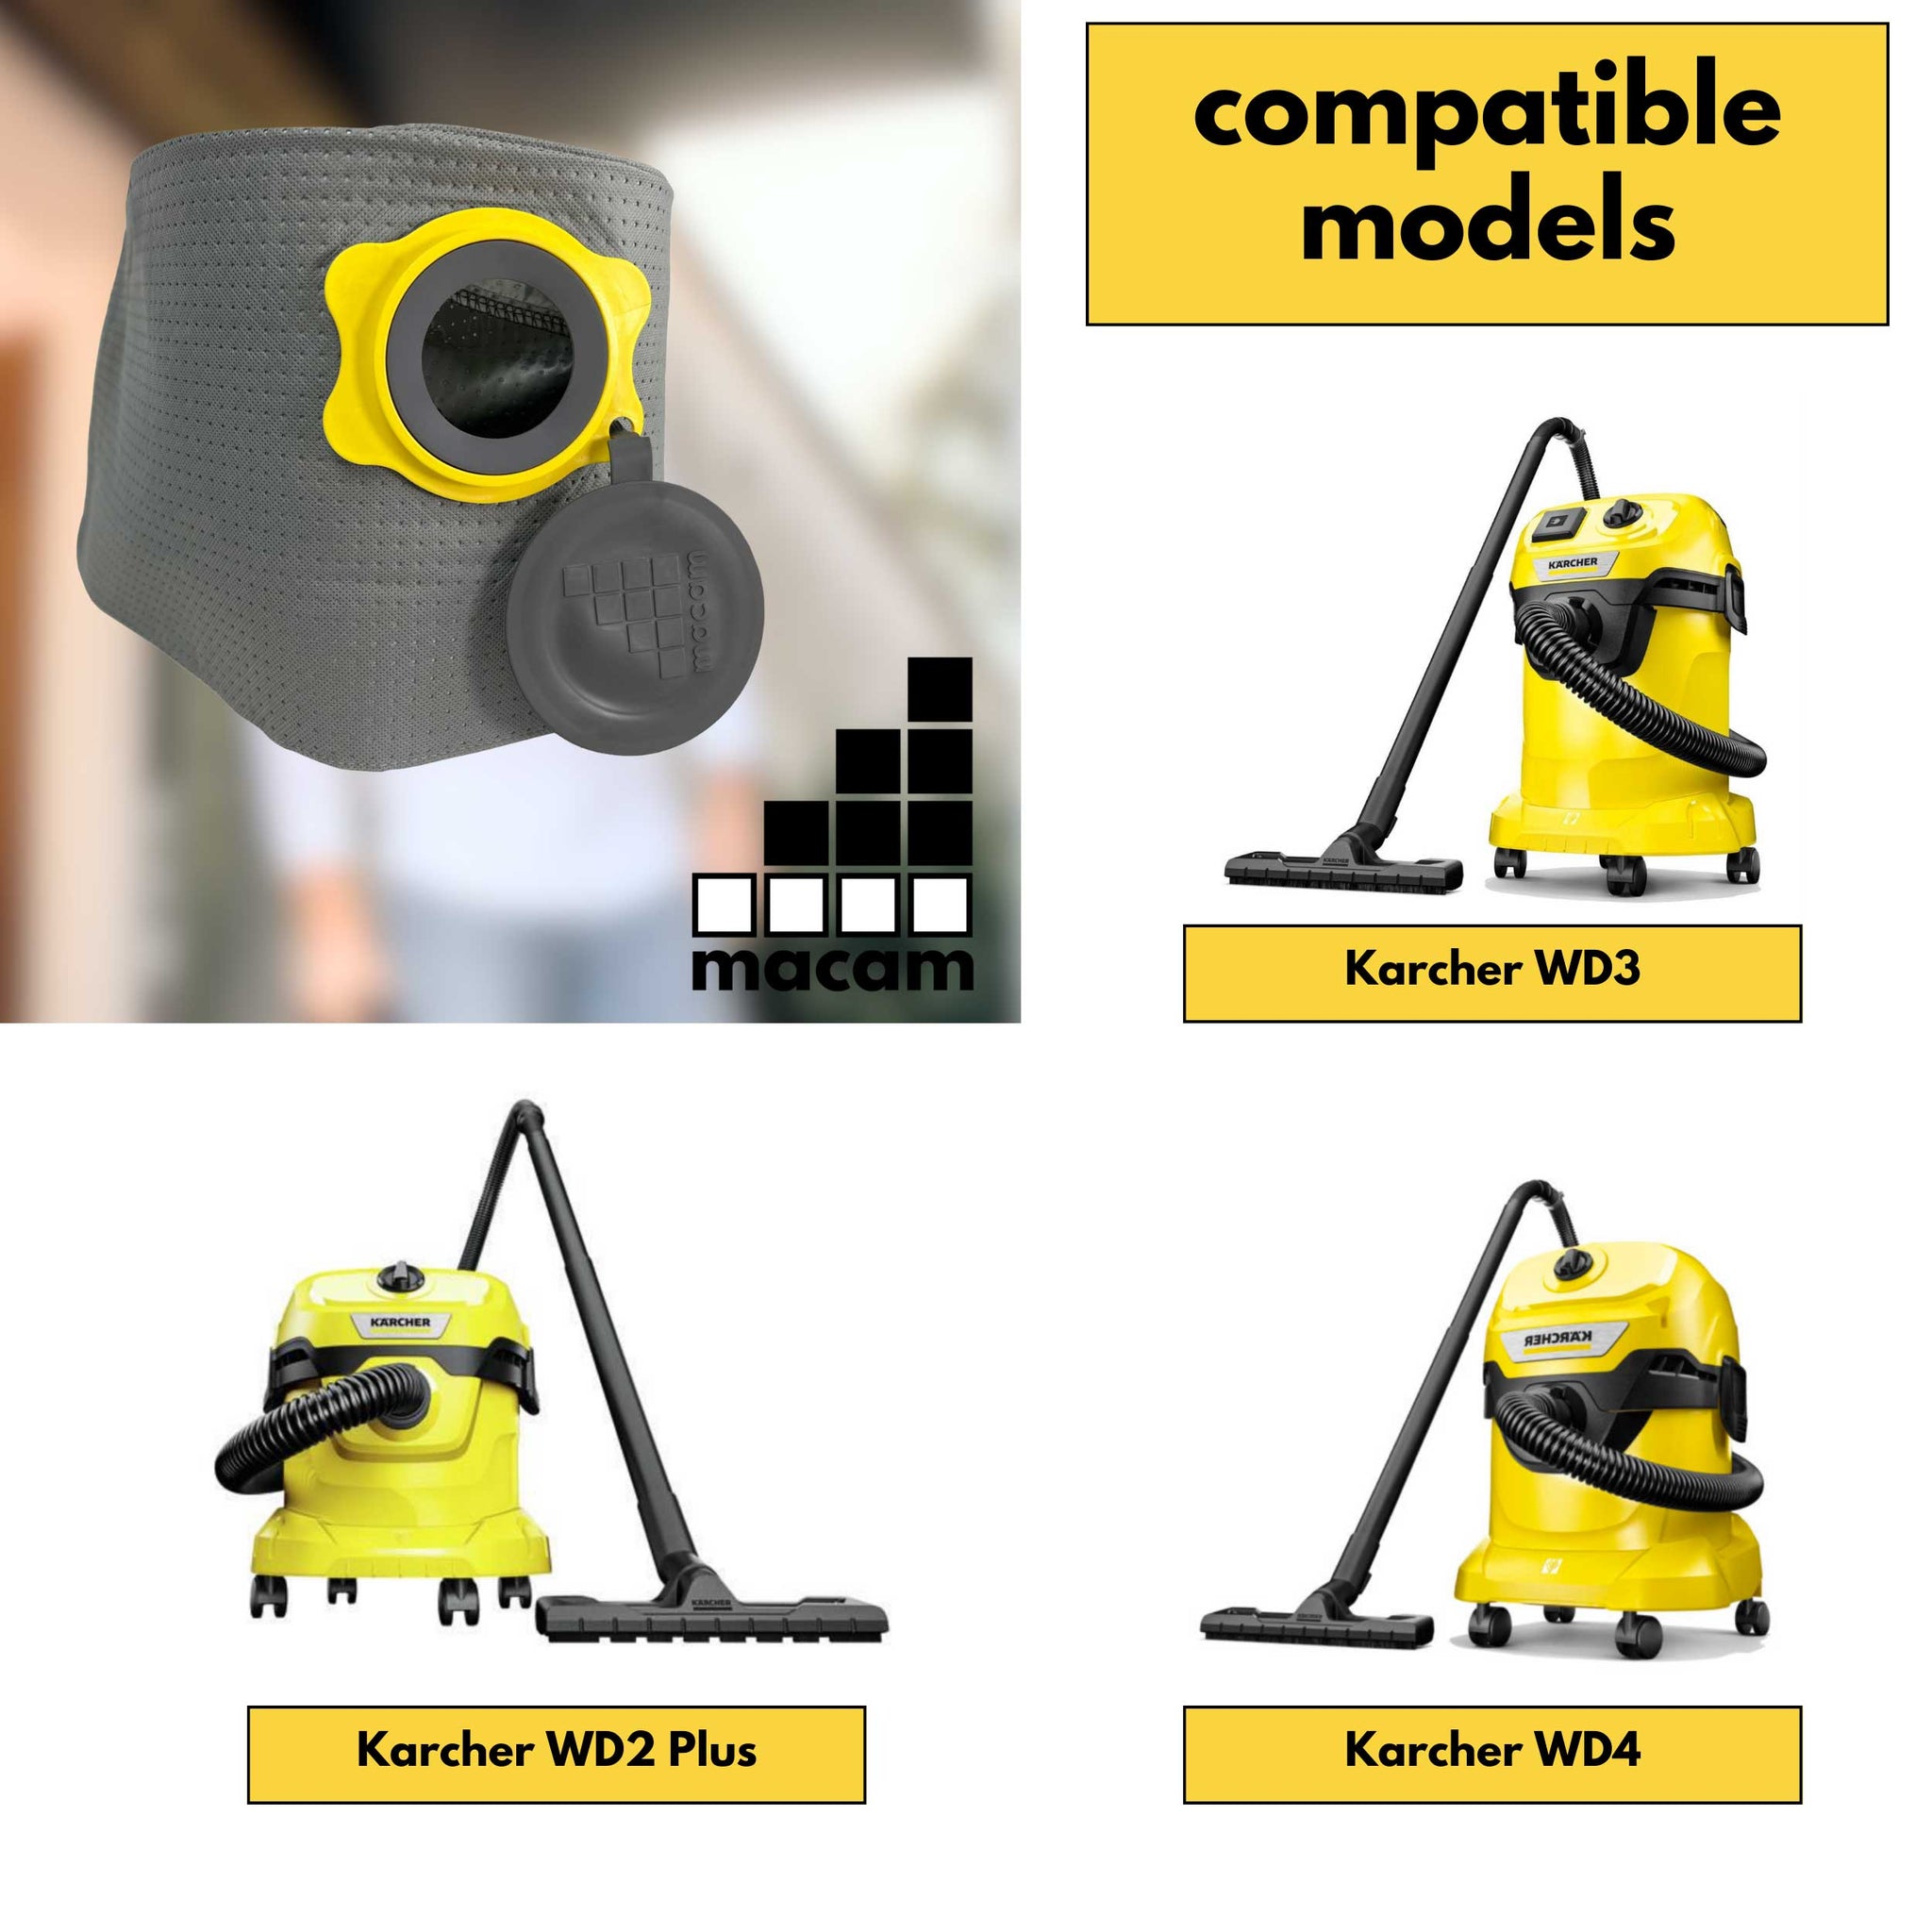 Reusable dust bag for Karcher WD2 Plus, WD3 and WD4 vacuum